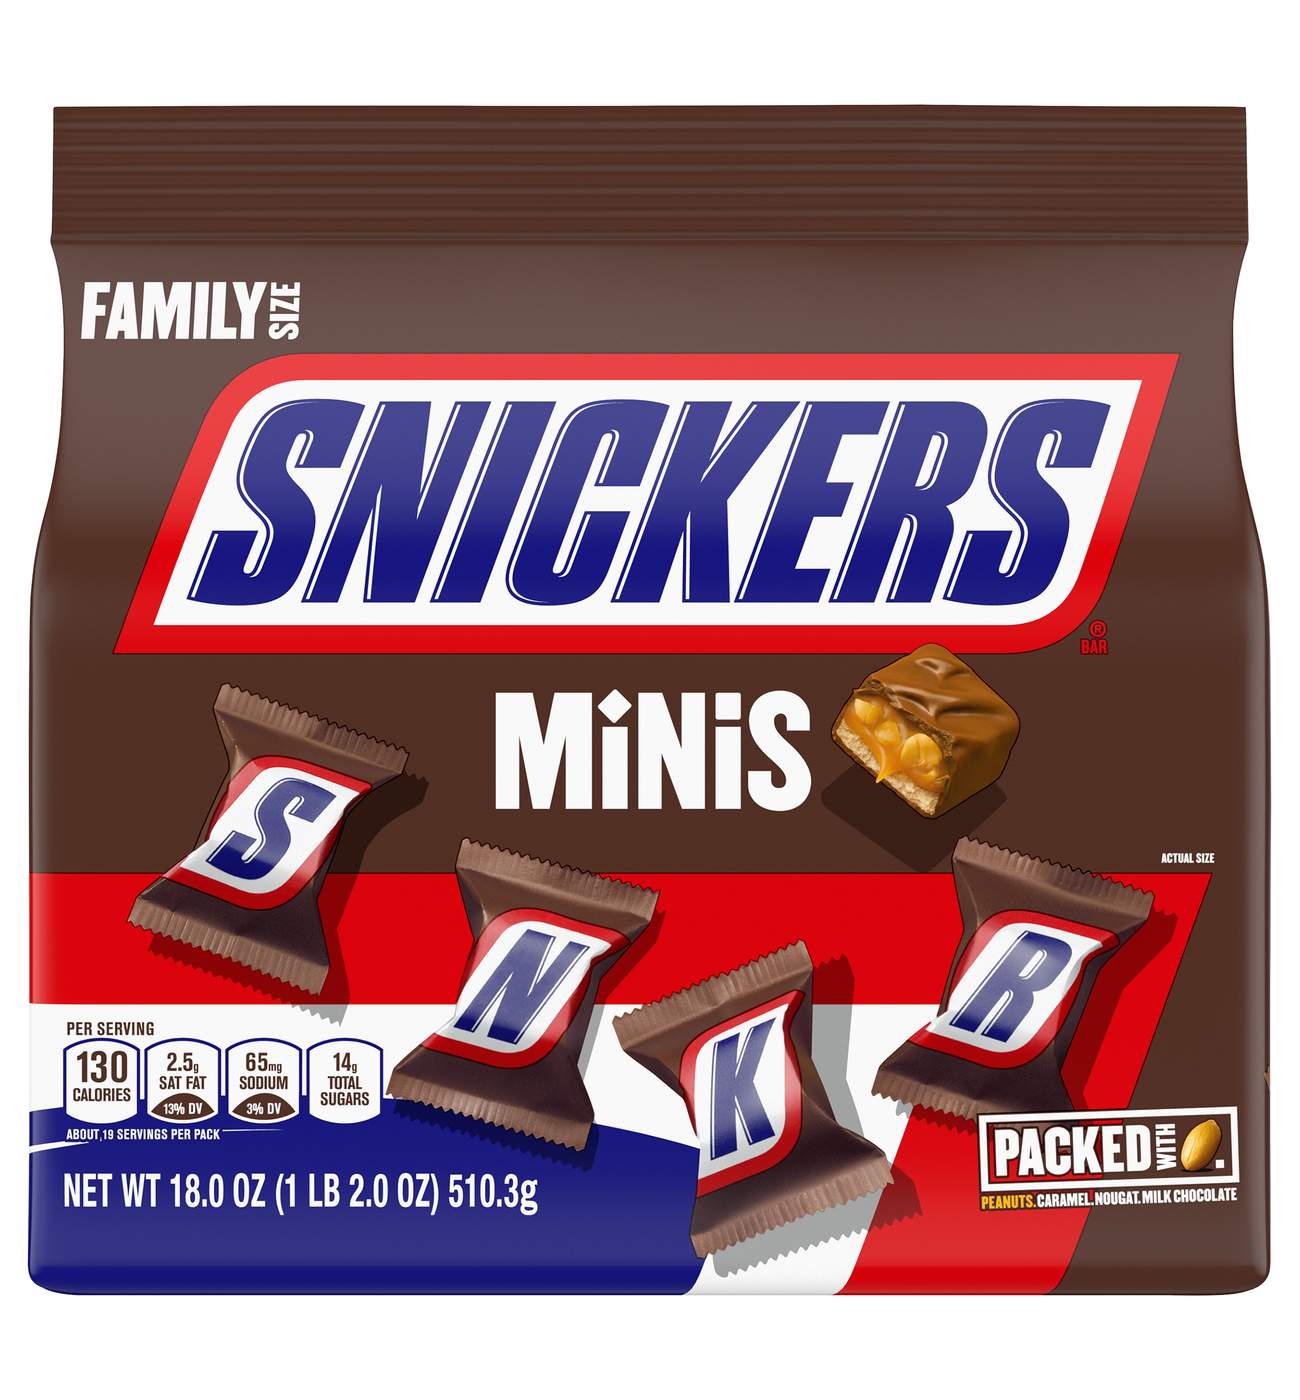 Snickers Minis Chocolate Candy Bars - Family Size; image 1 of 7